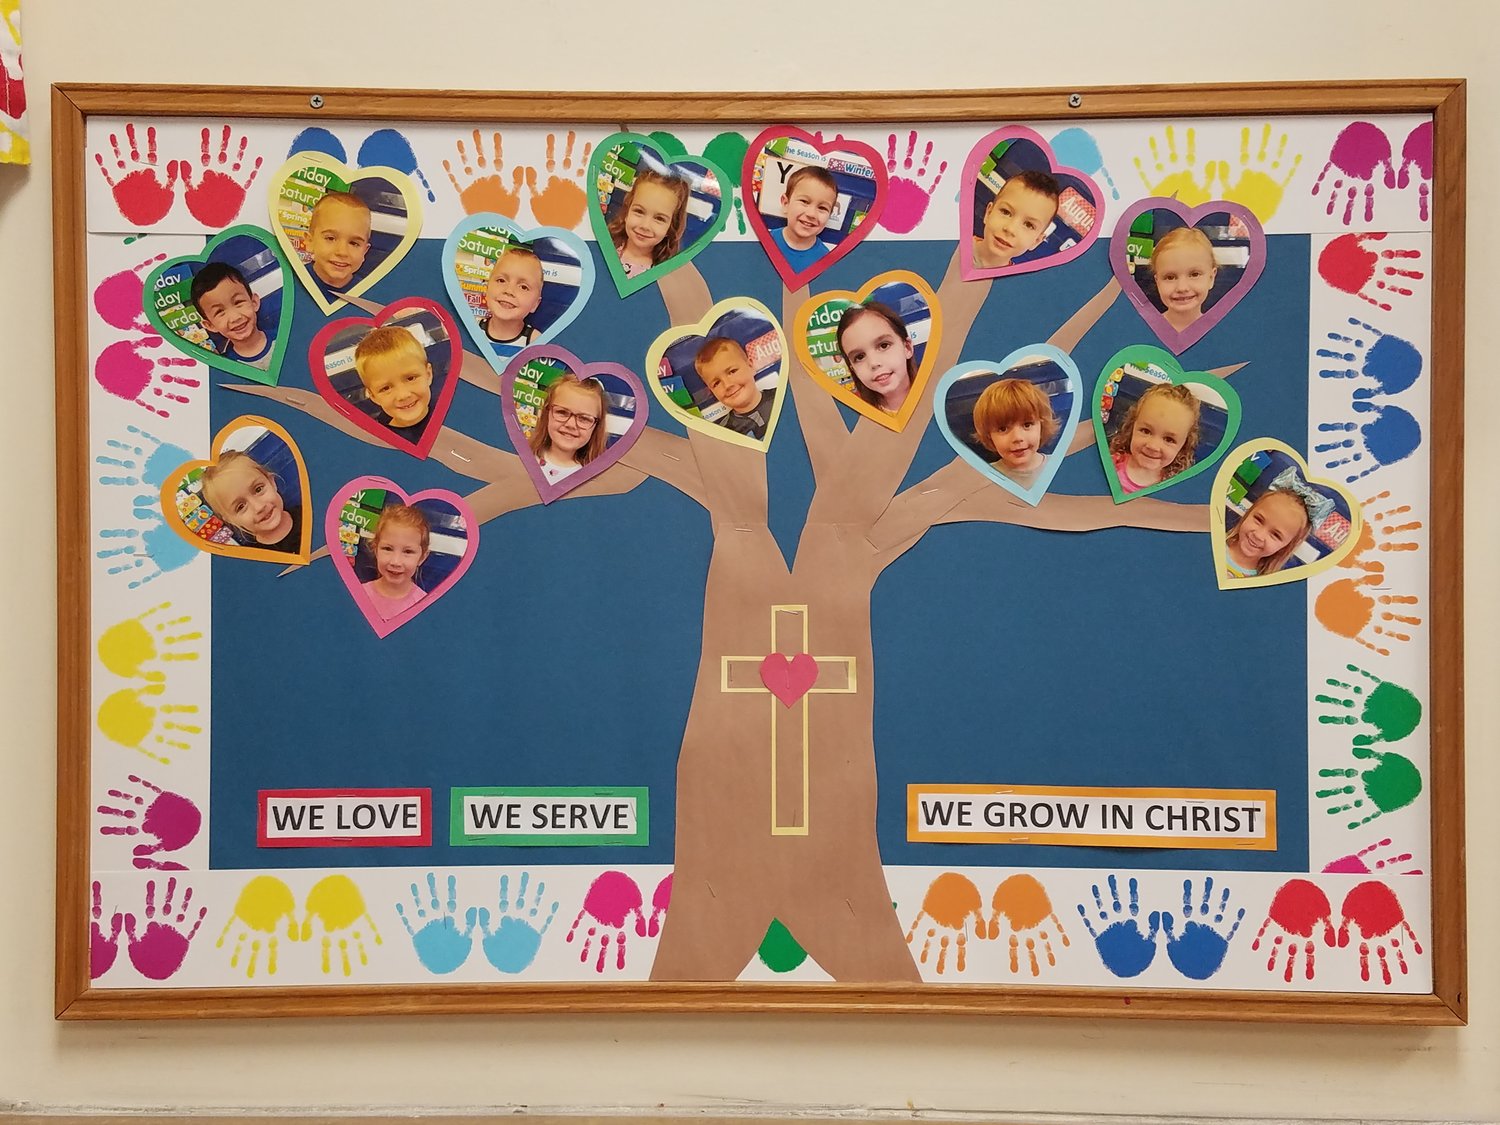 This banner in Holy Family School illustrates service.